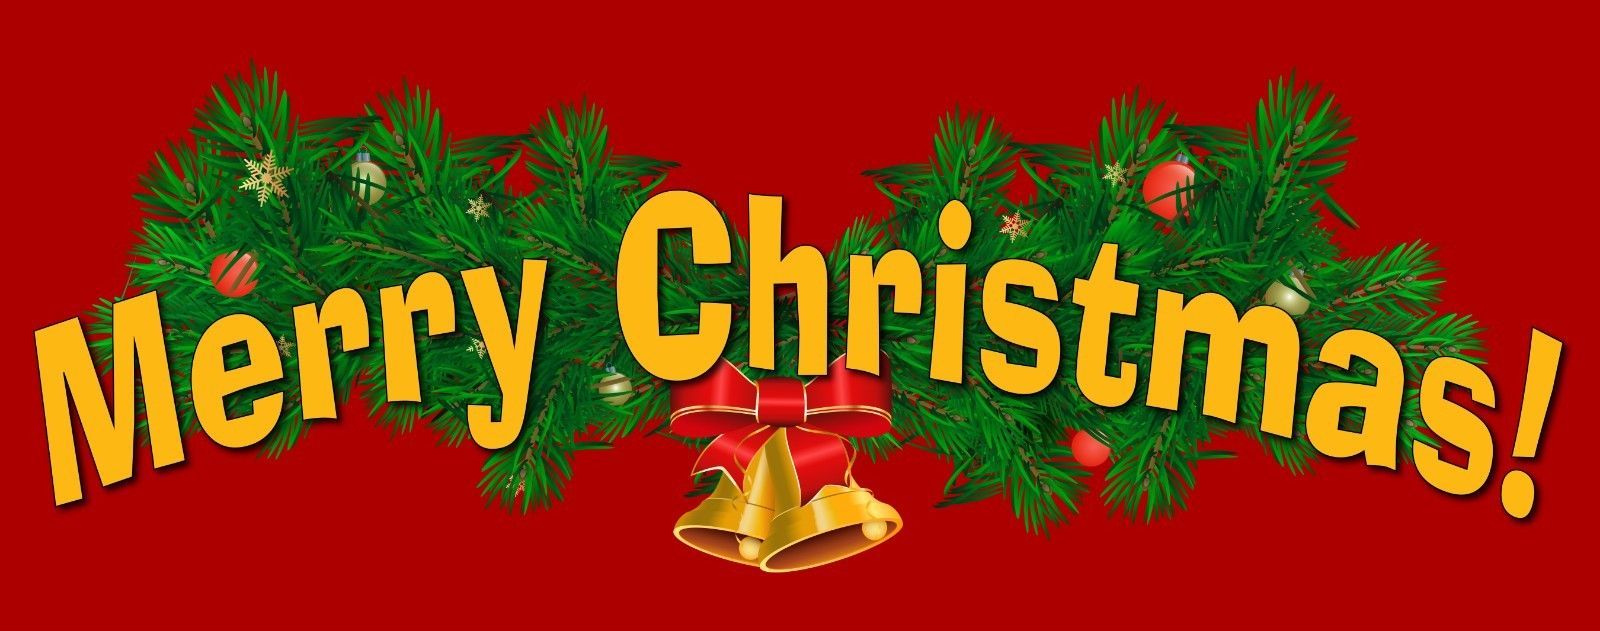 Merry Christmas Indoor Outdoor Holiday Christmas Party Decor Vinyl Banner Sign Banners